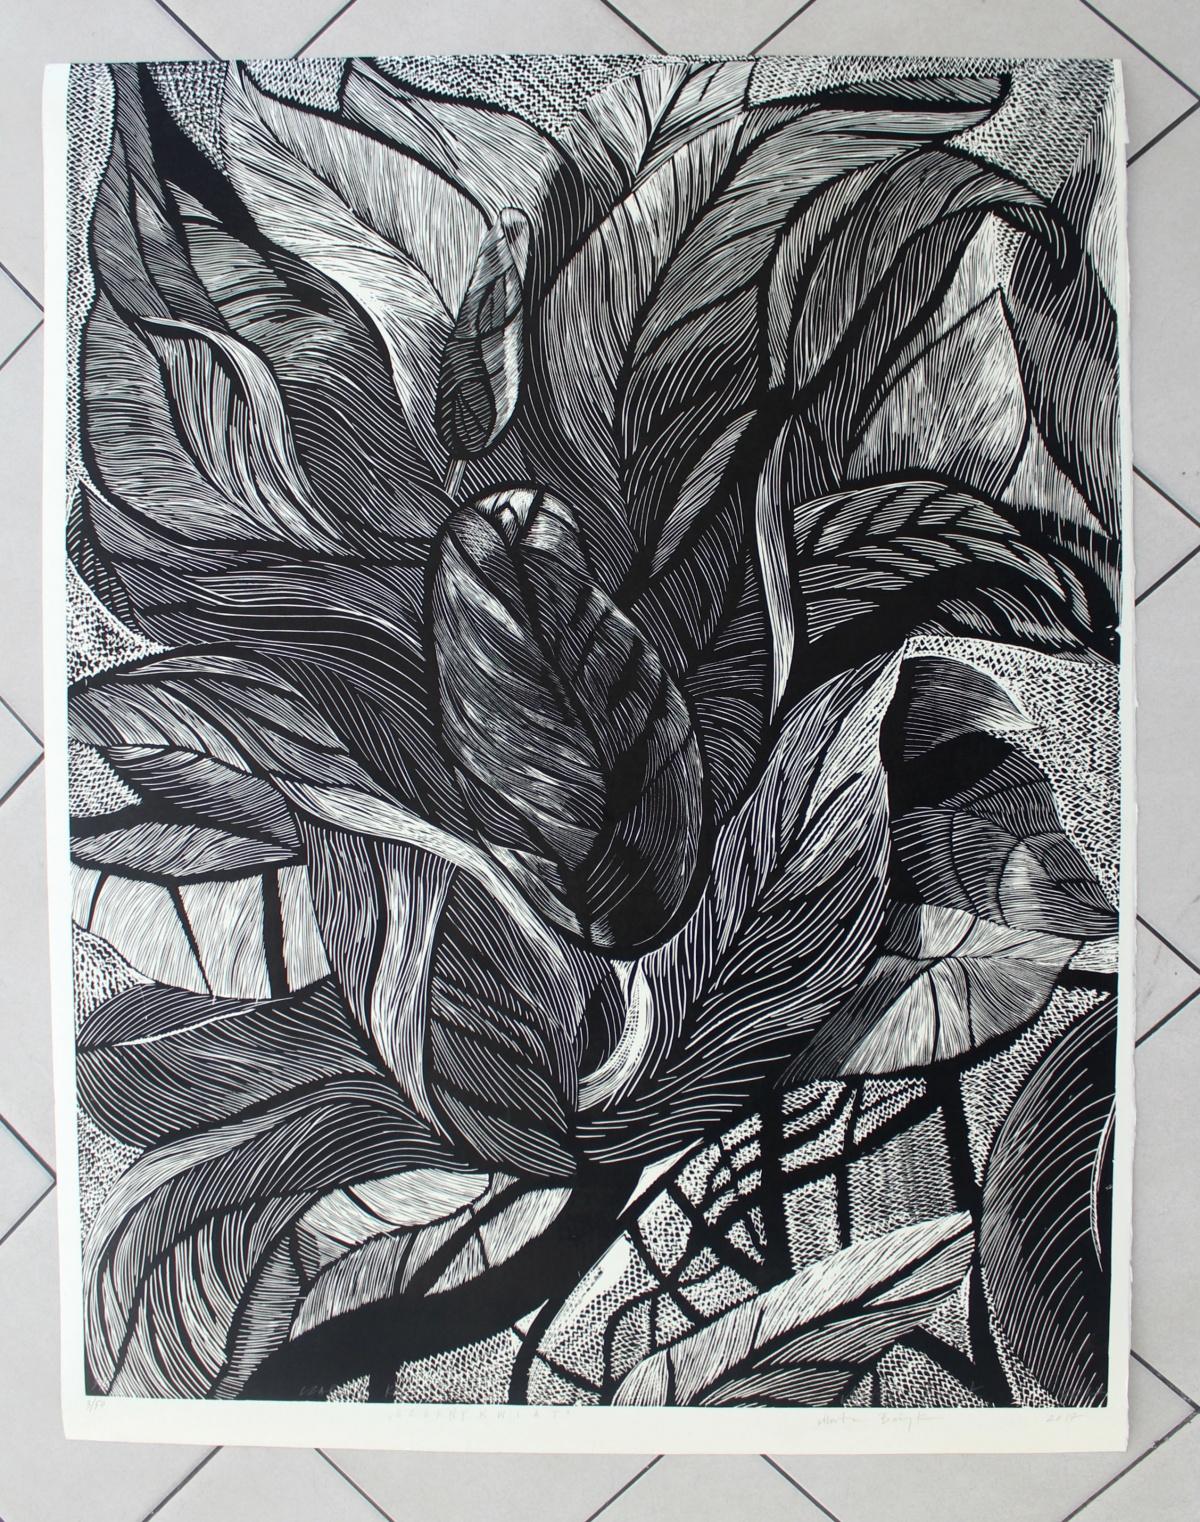 Black flower - XXI Century, Contemporary Floral Linocut, Black and White - Print by Marta Bozyk